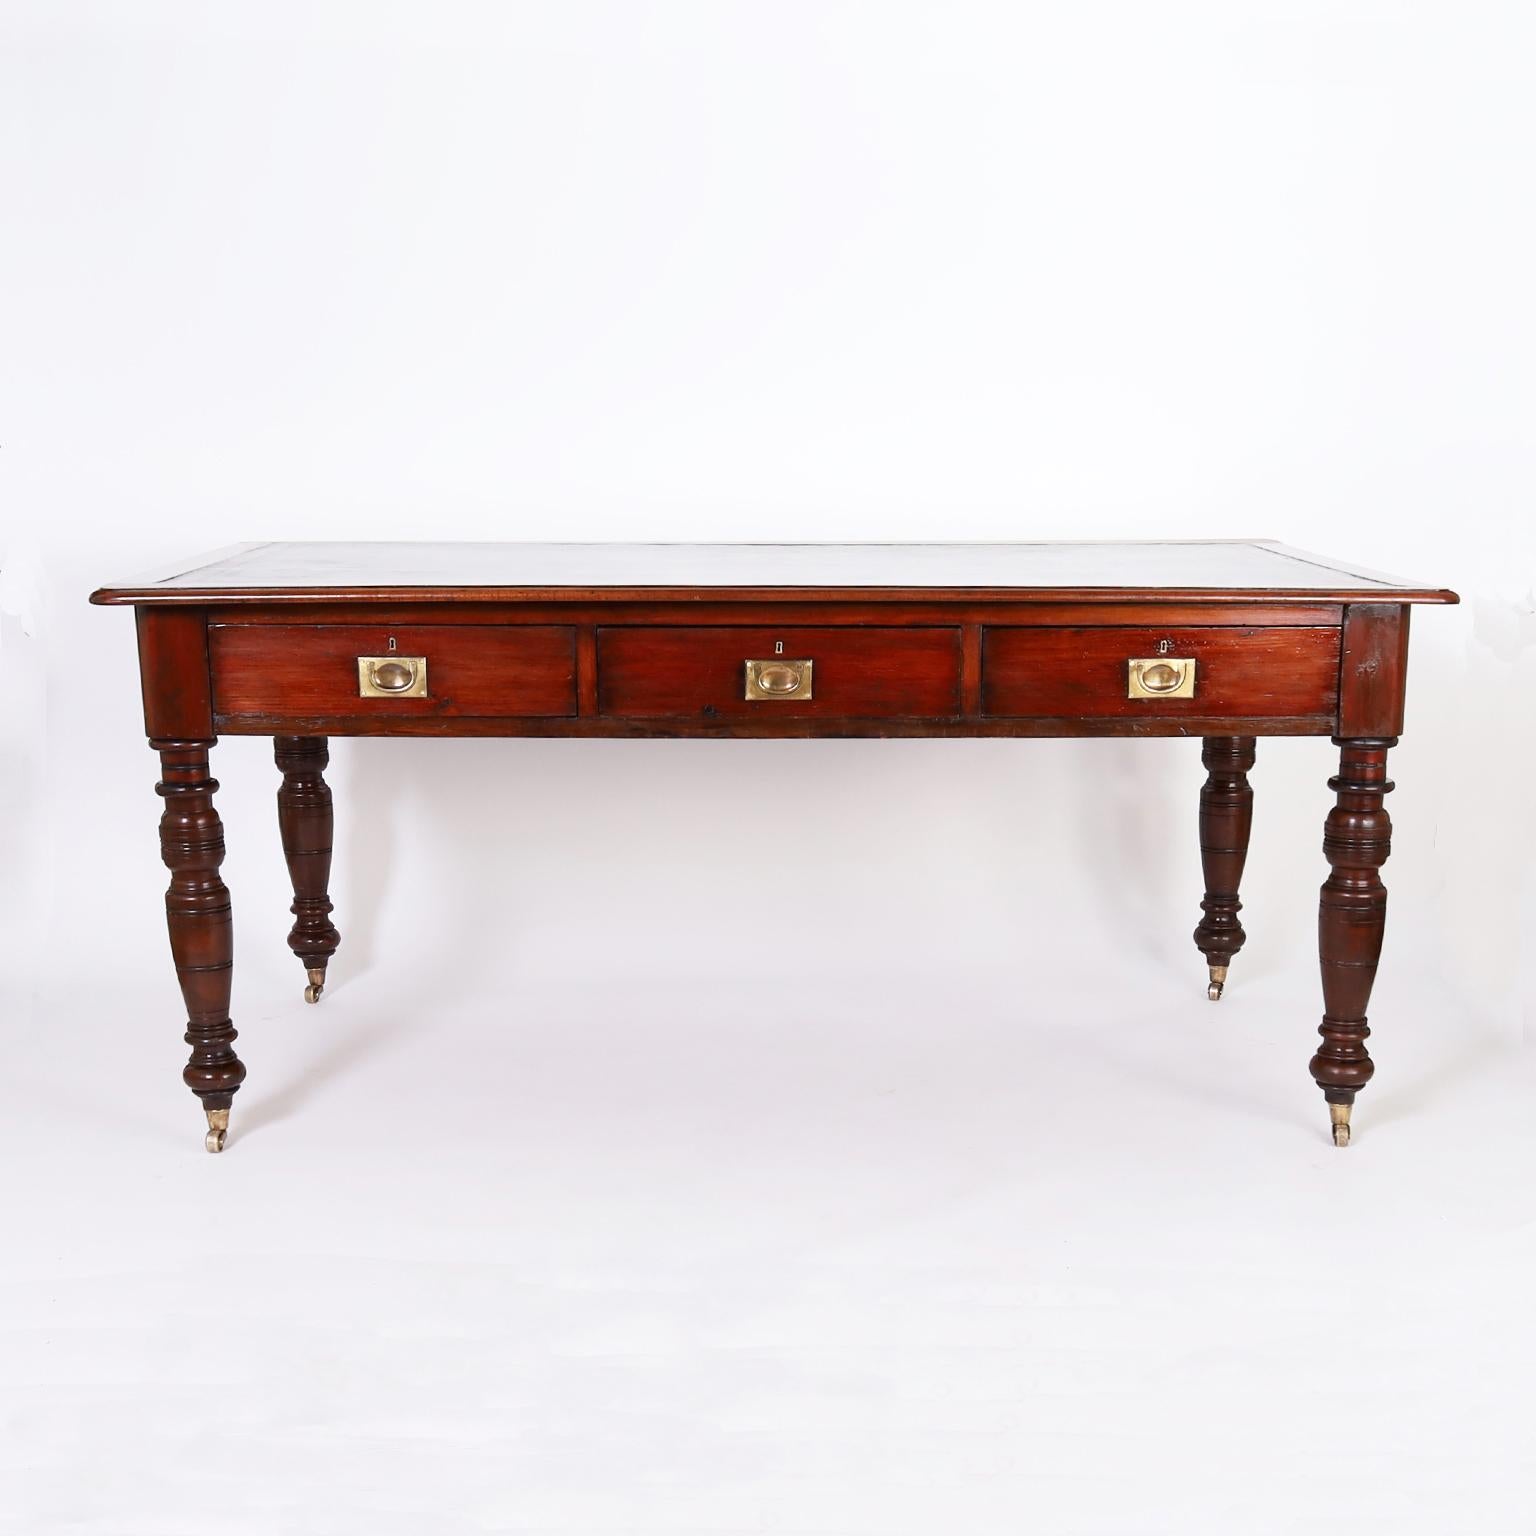 19th centur British colonial style desk or library table in mahogany with a variegated green brown tooled leather top, three drawers in the case with brass campaign hardware and turned legs with brass casters.